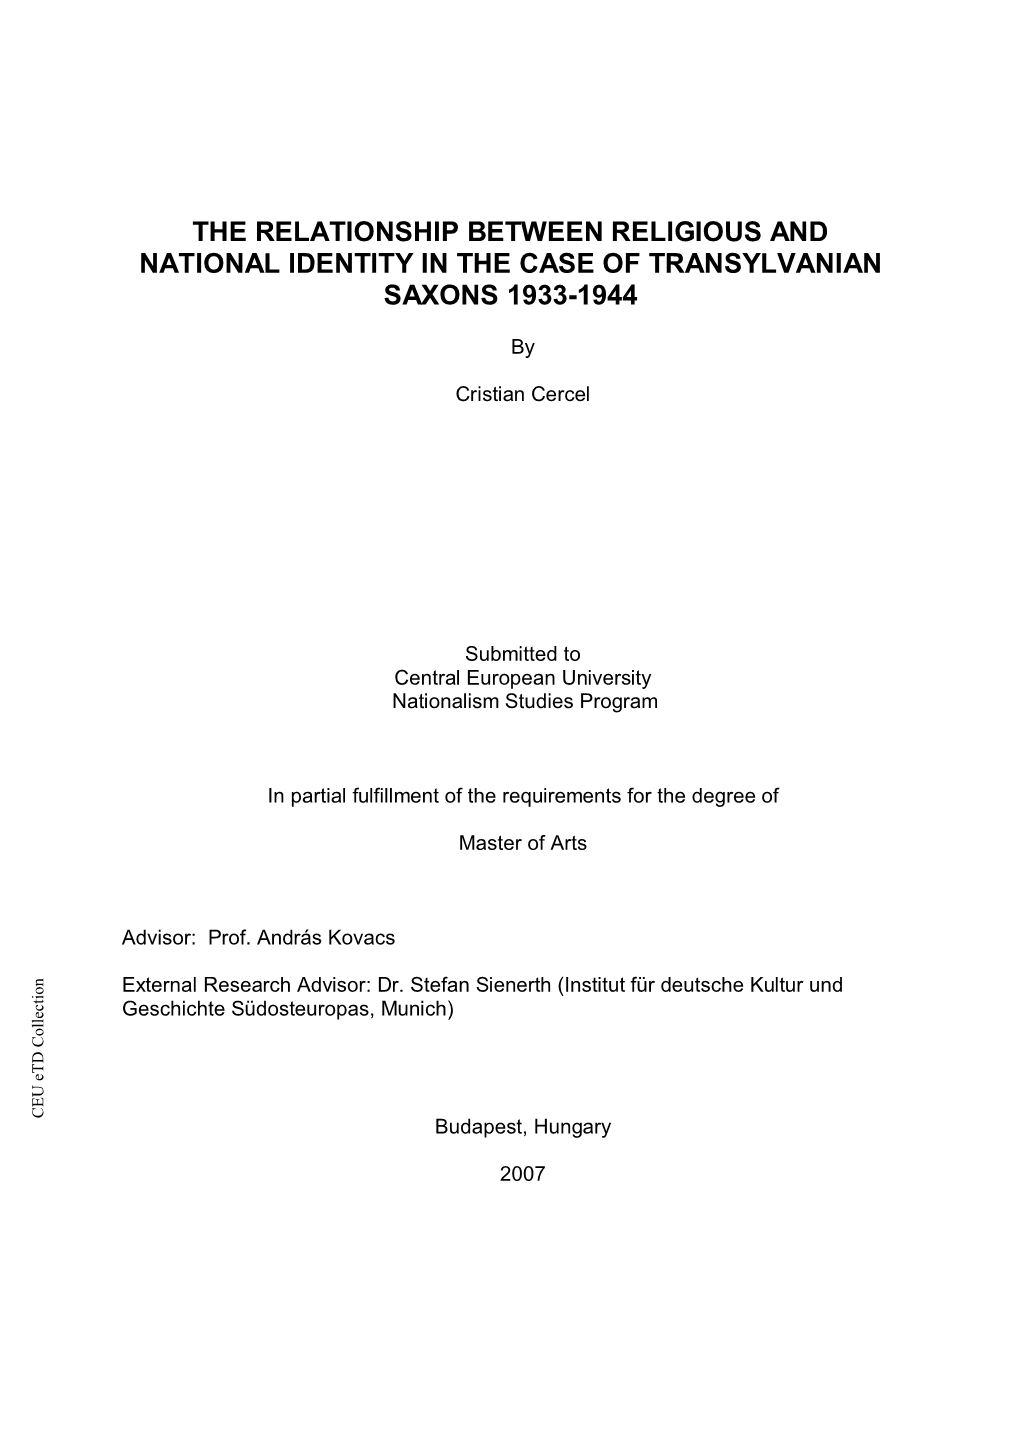 The Relationship Between Religious and National Identity in the Case Of